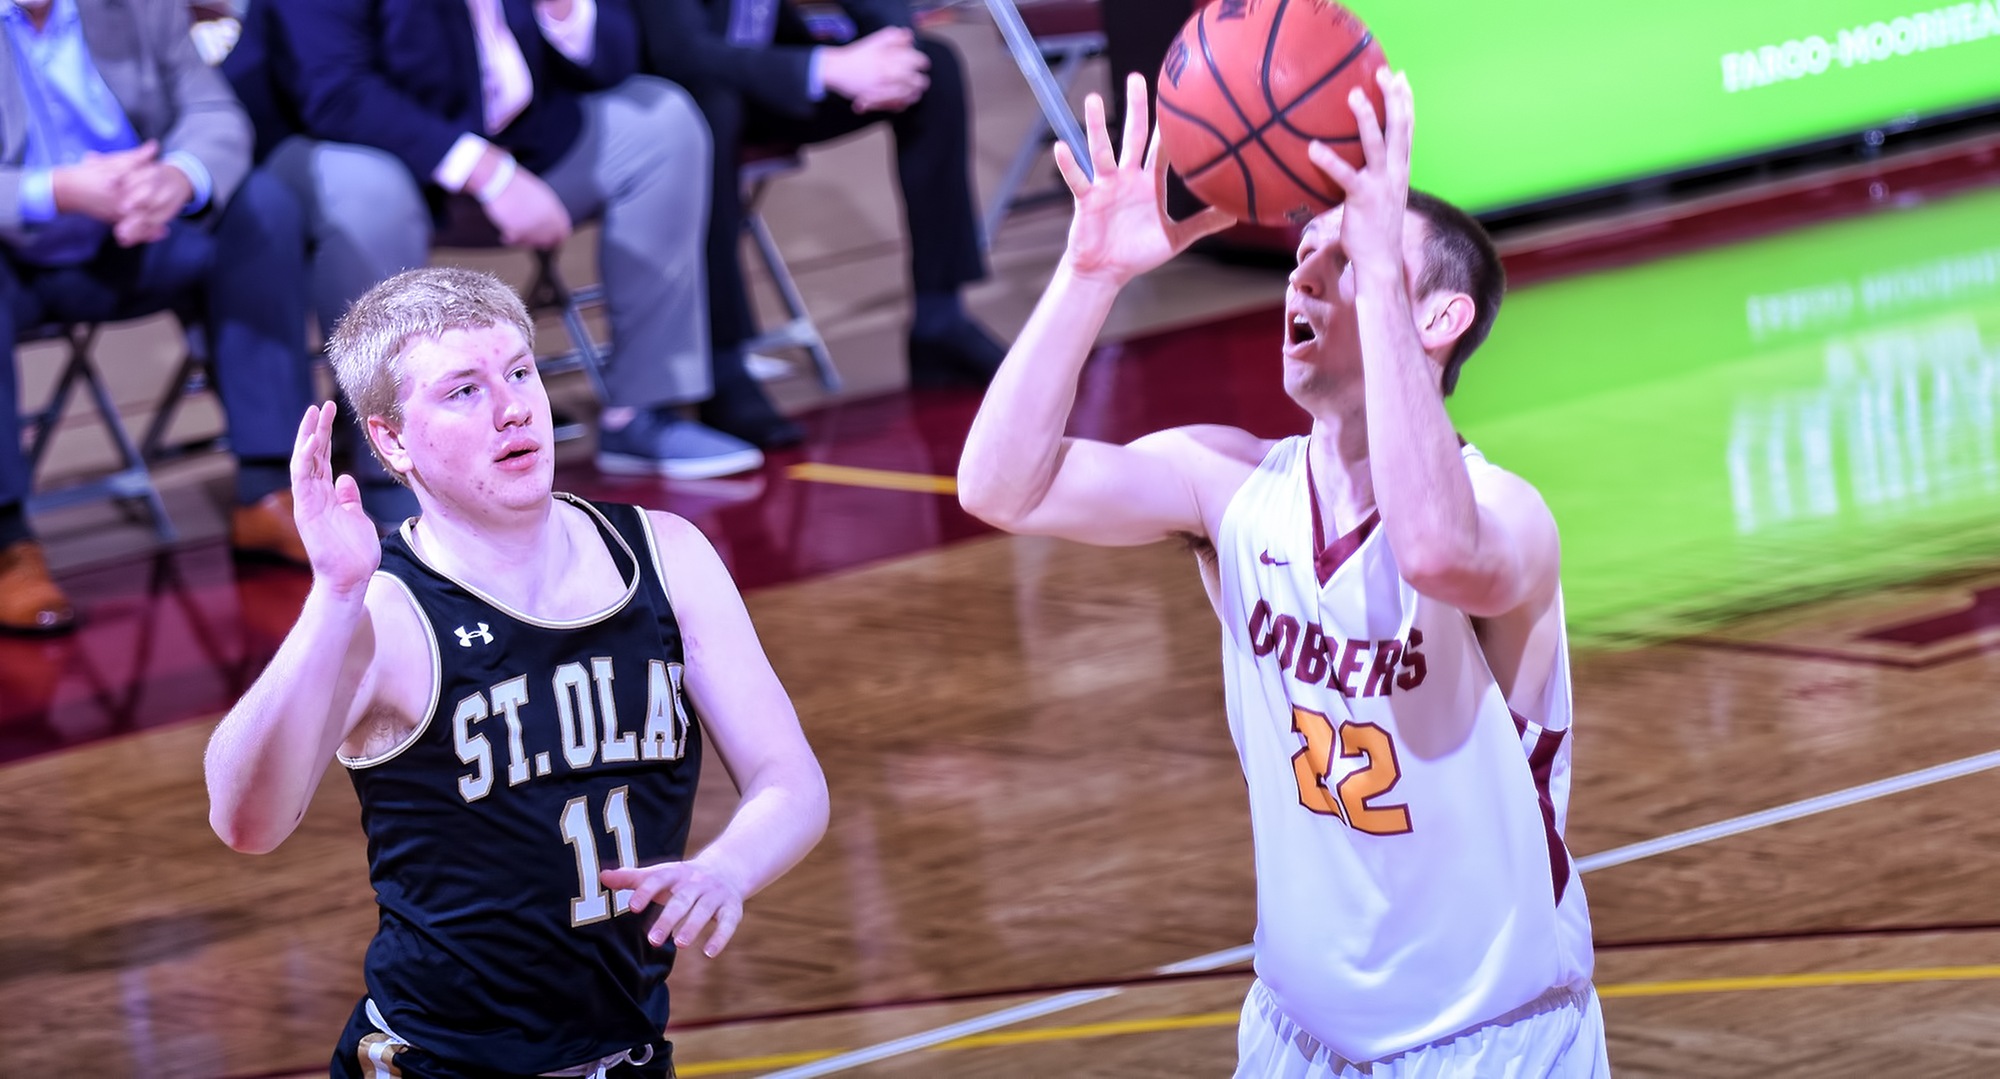 Junior Jacob Fredrickson went 3-for-5 from the floor, 5-for-7 from the free throw line and finished with a team-high 11 points in the Cobbers' game at St. Olaf.